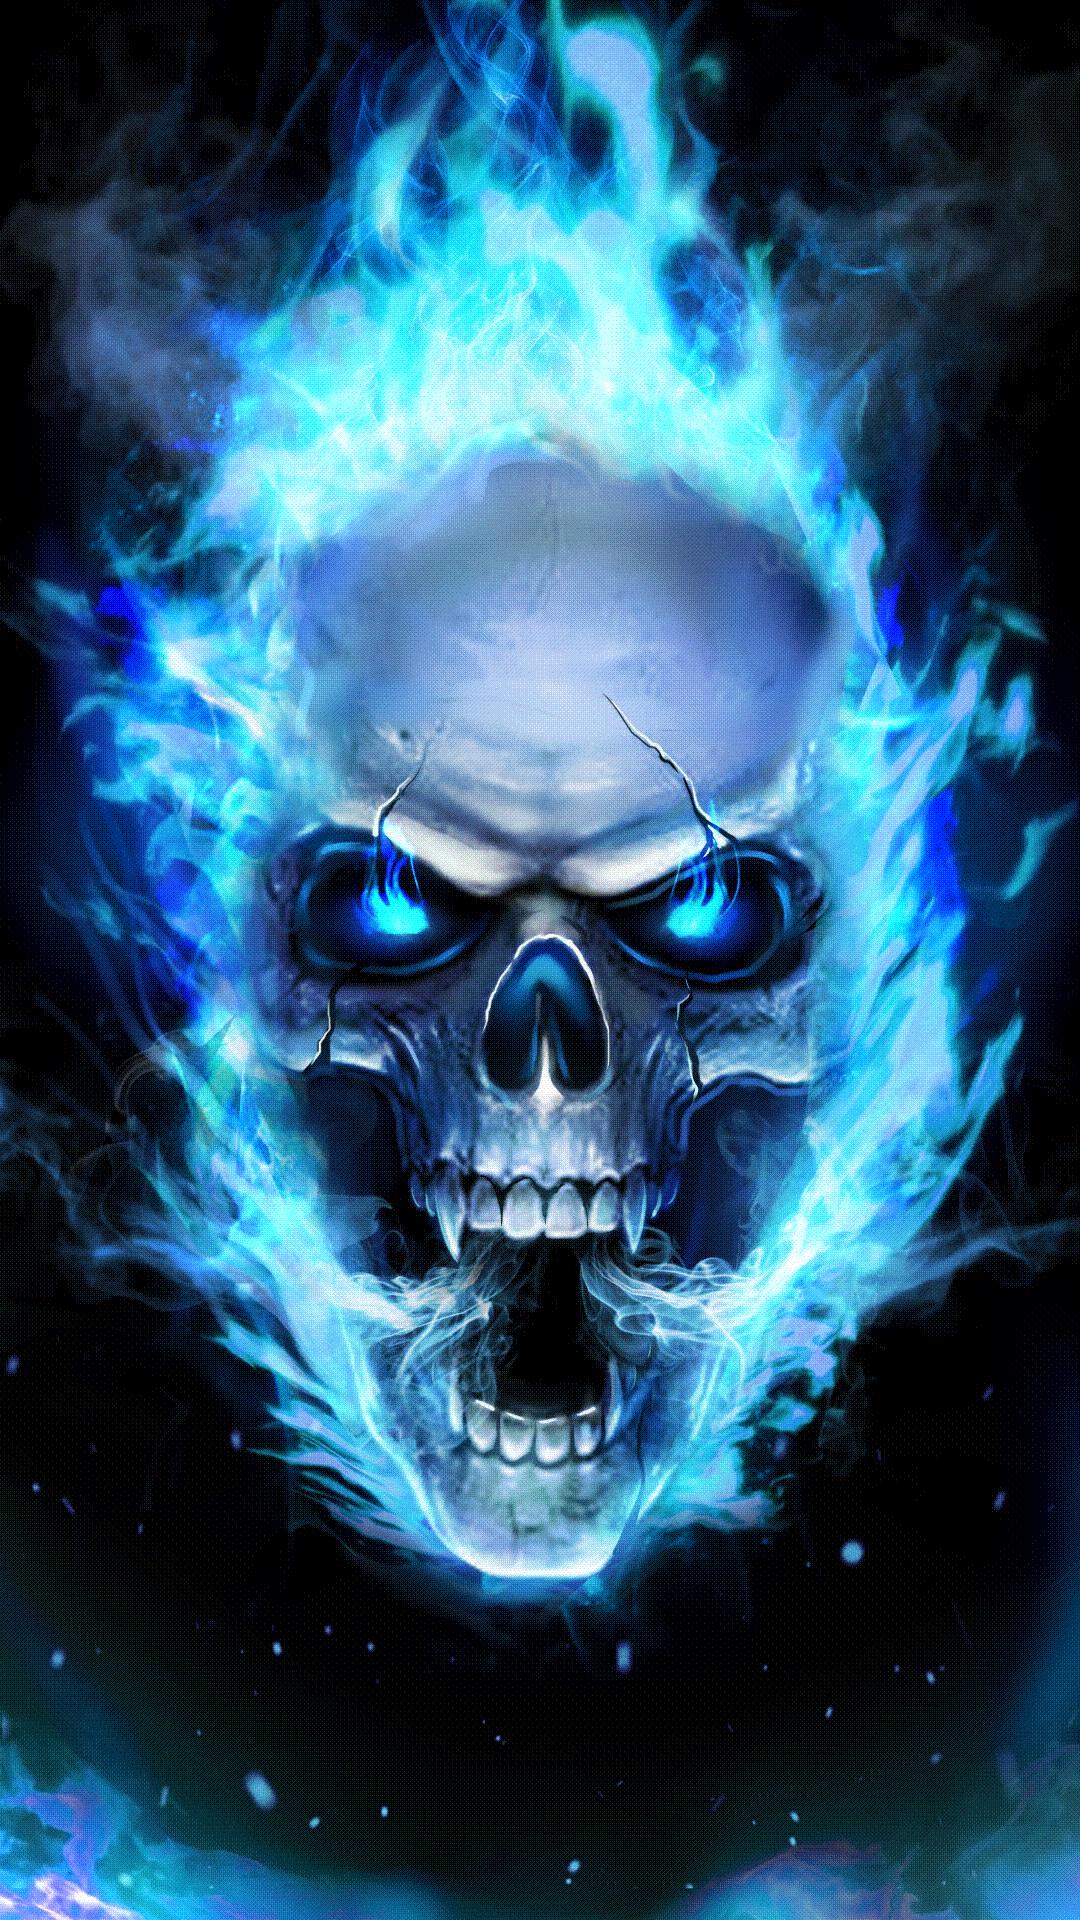 Fire Skull Live Wallpaper for Android